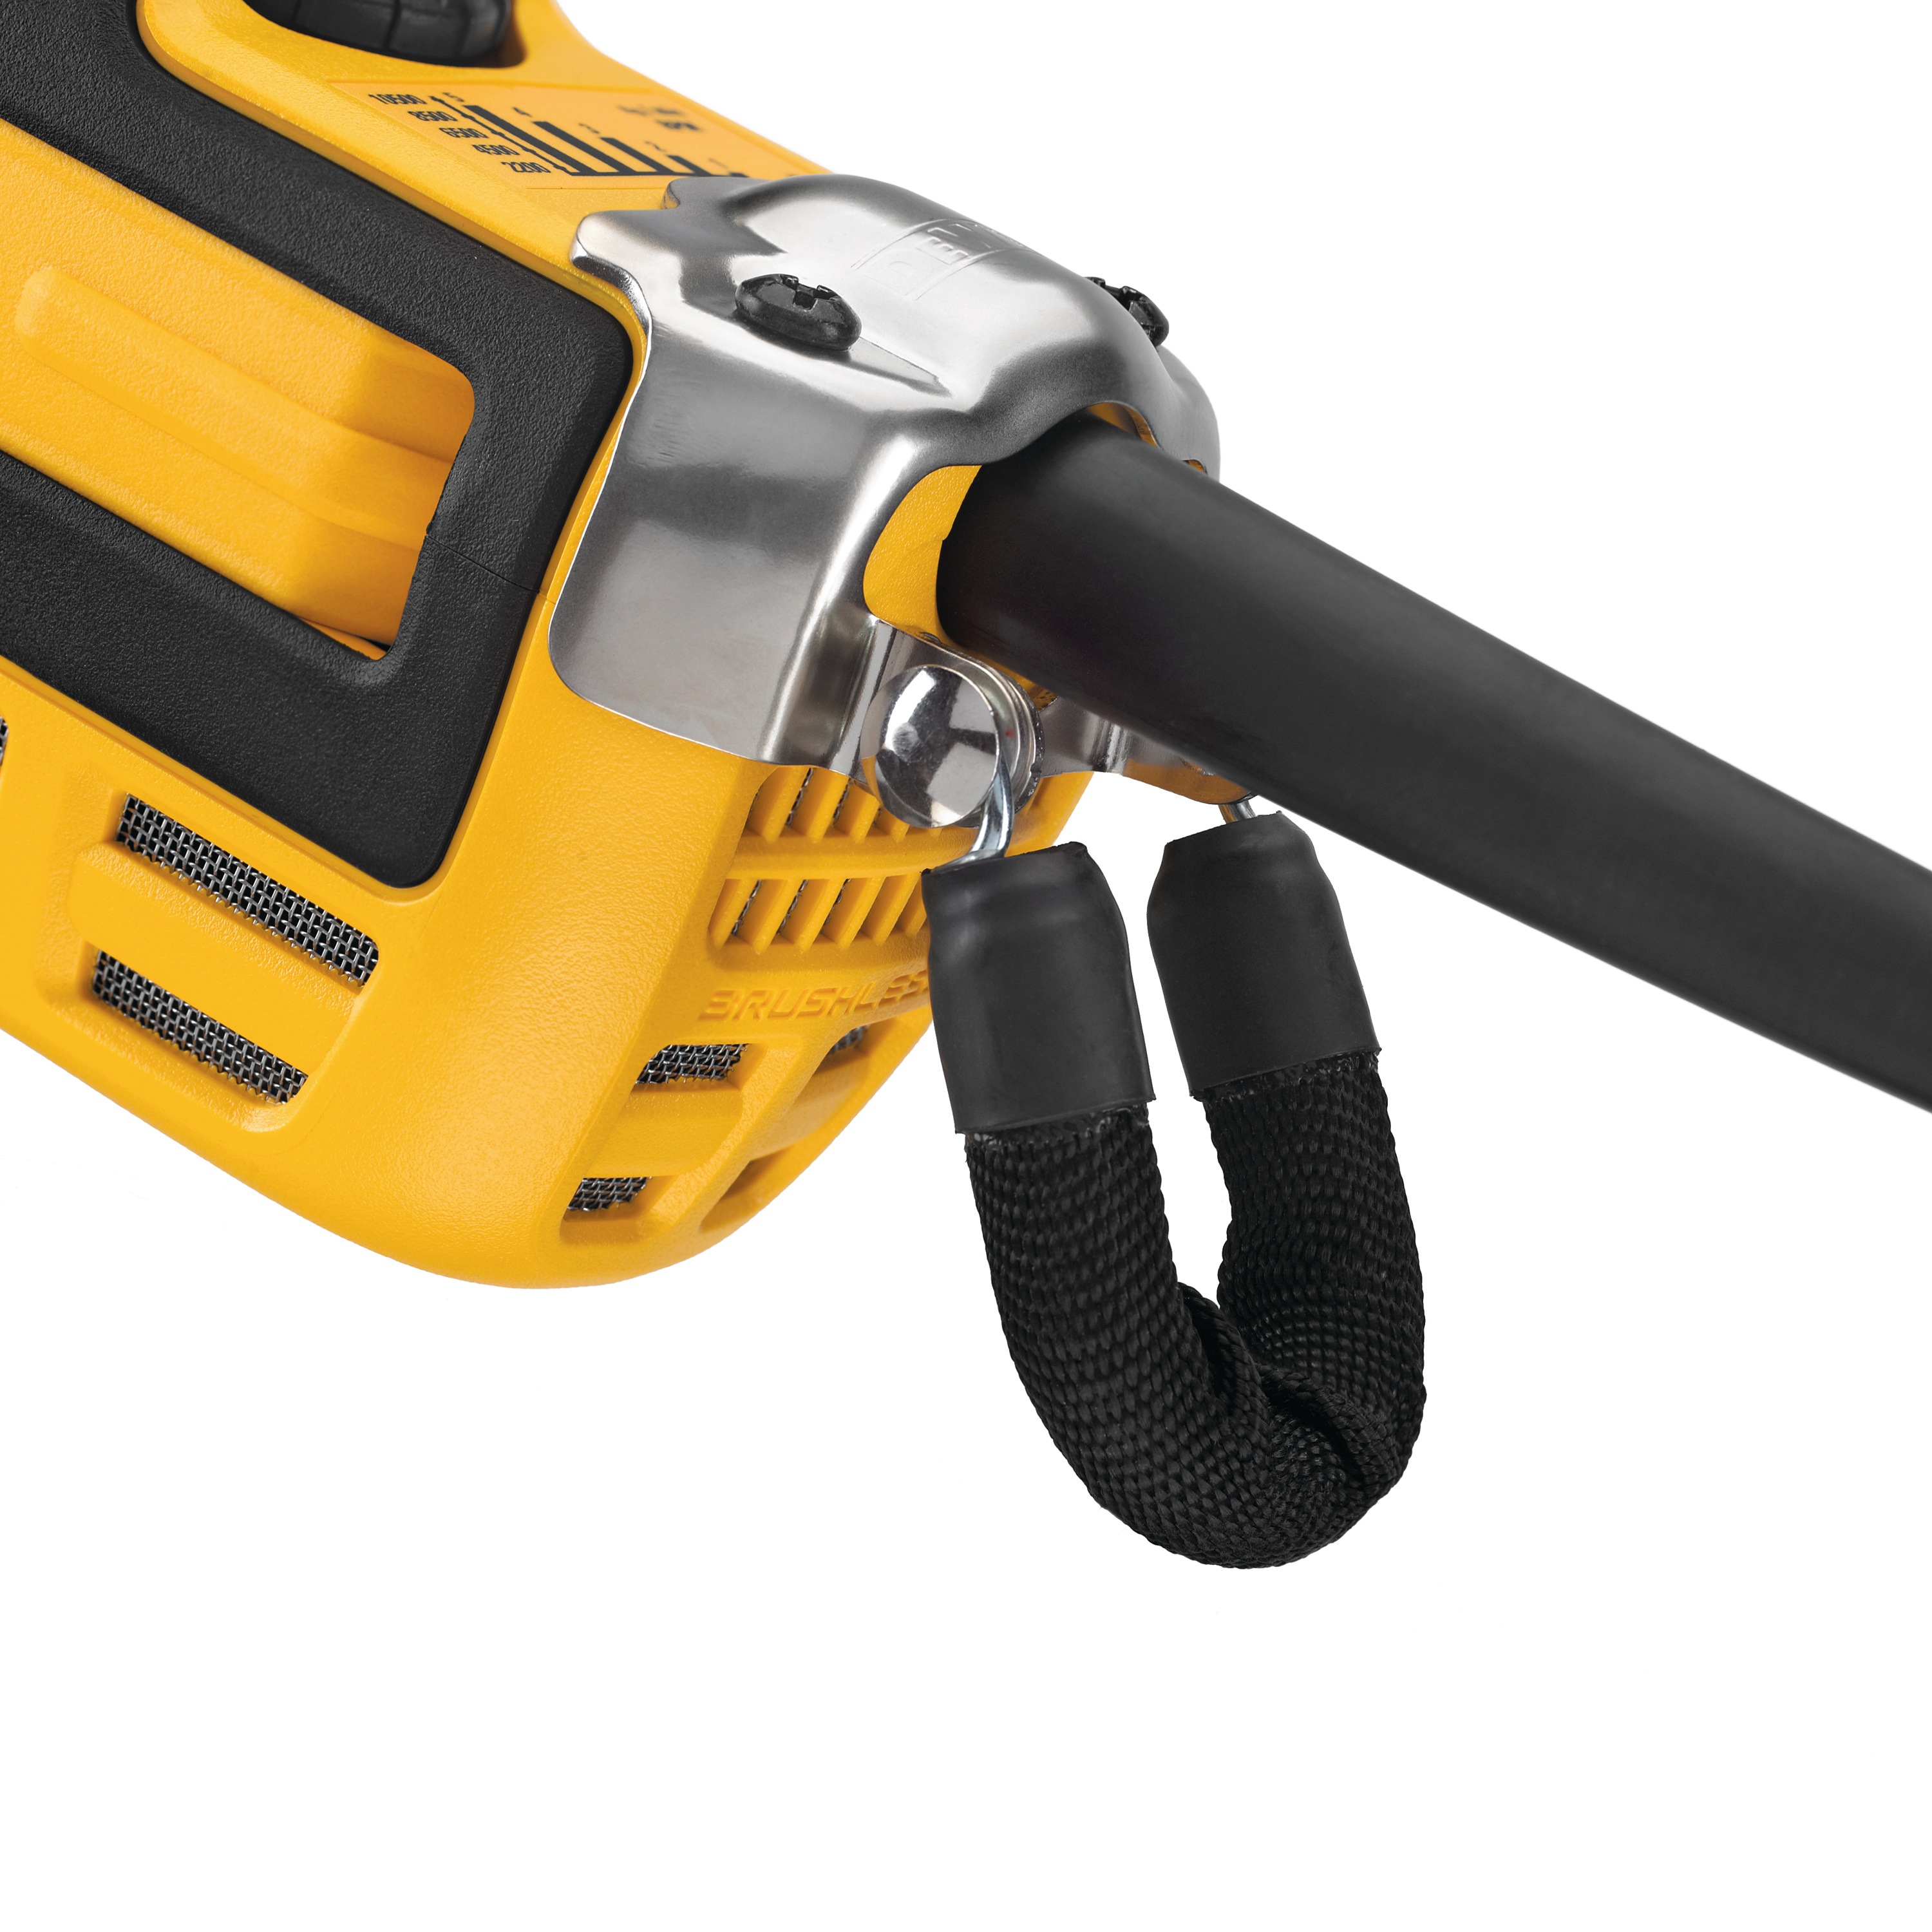 DEWALT - 5 in Brushless Paddle Switch Small Angle Grinder with Kickback Brake NoLock Variable Speed - DWE43214NVS